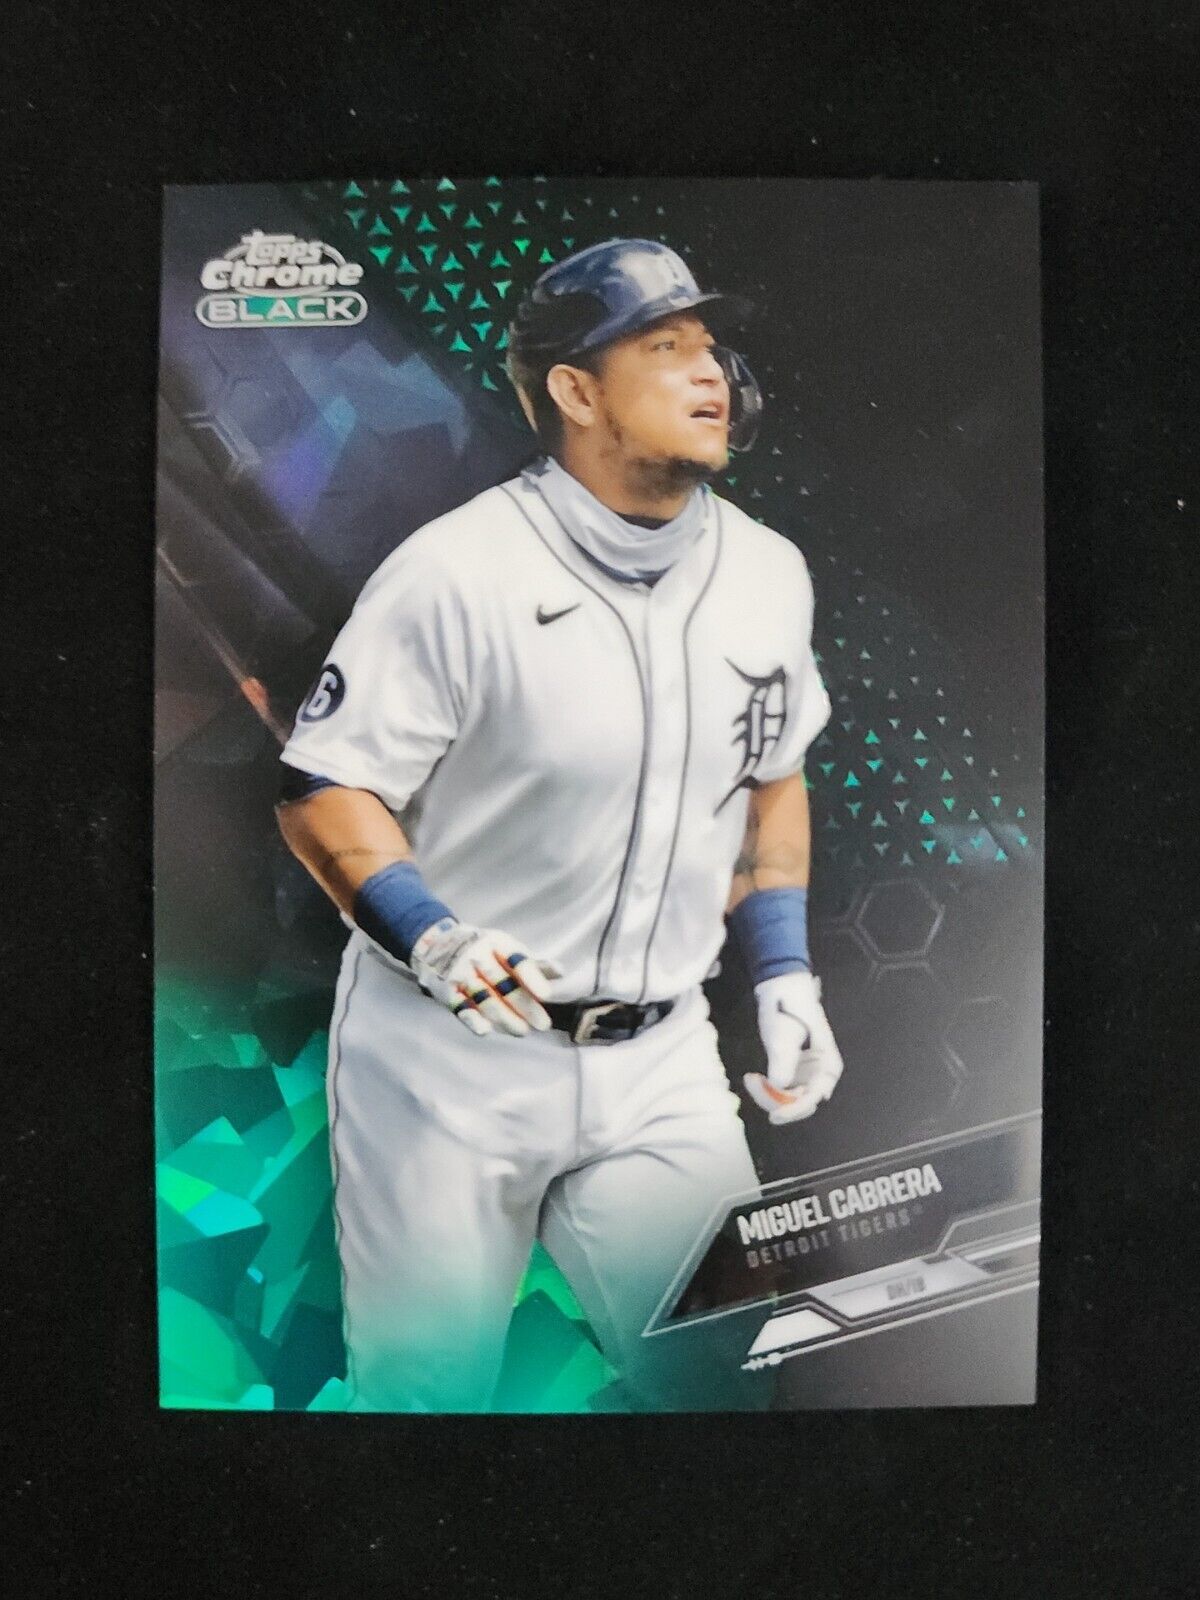 2022 Topps Chrome Black Miguel Cabrera Green Atomic Refractor #/99